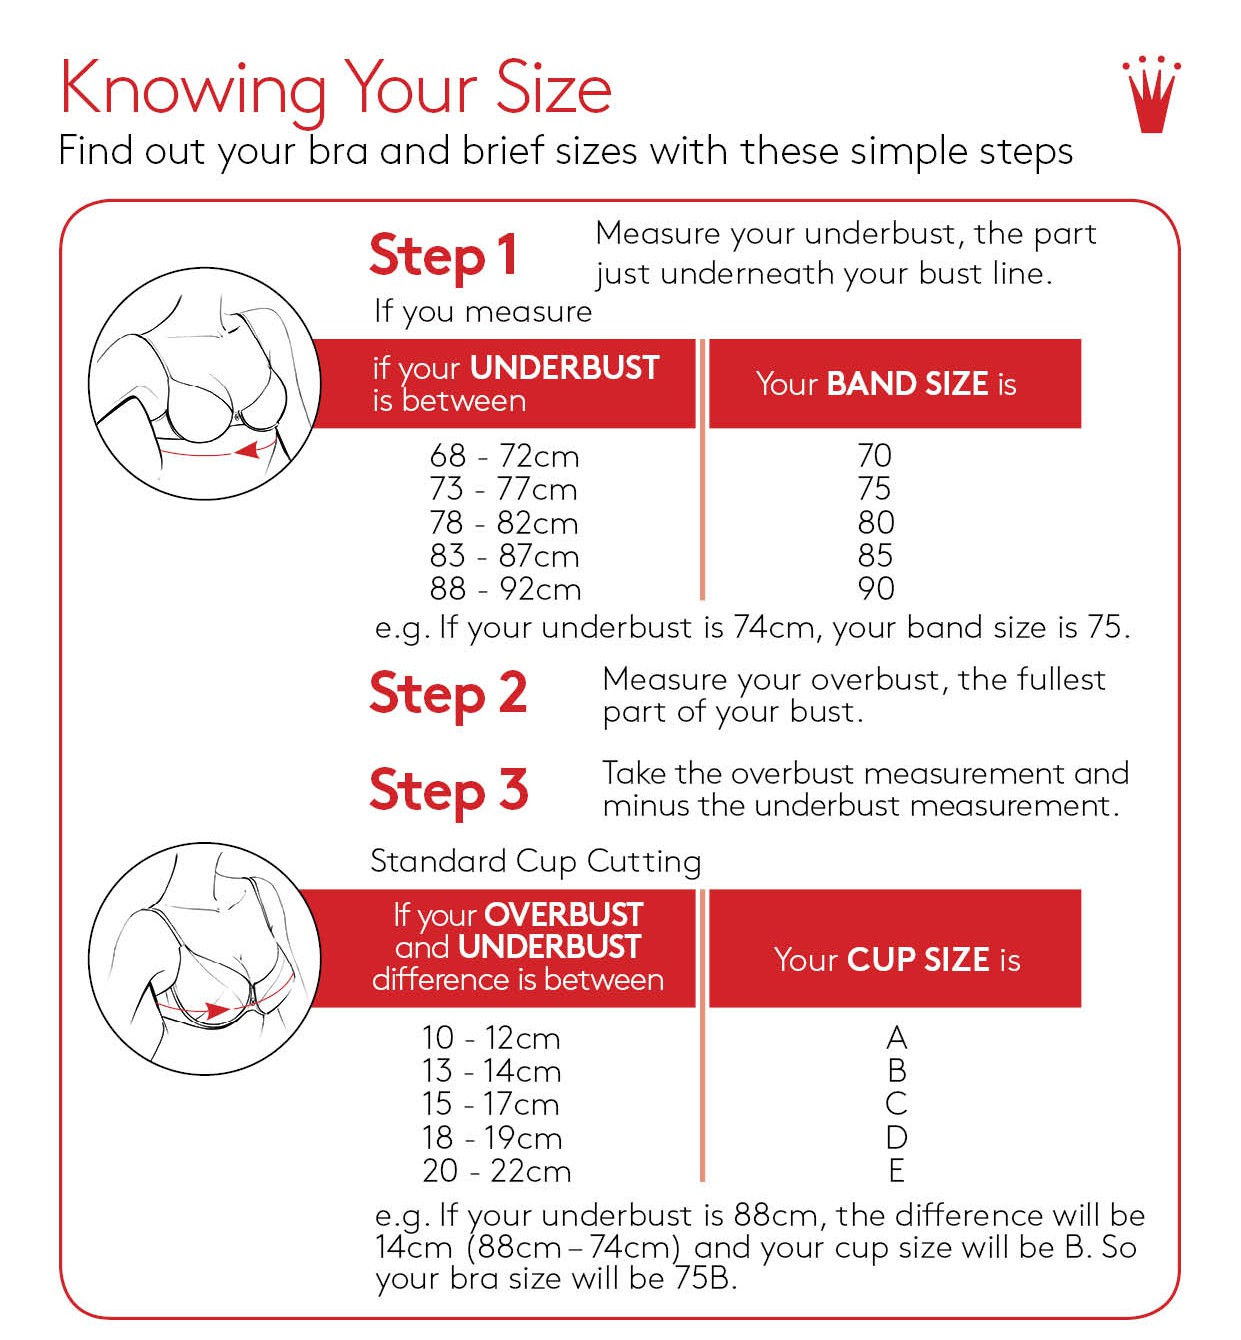 Triumph Size Guide. M Cup Size. Sizes of steps. How to know your Size. Cup size текст